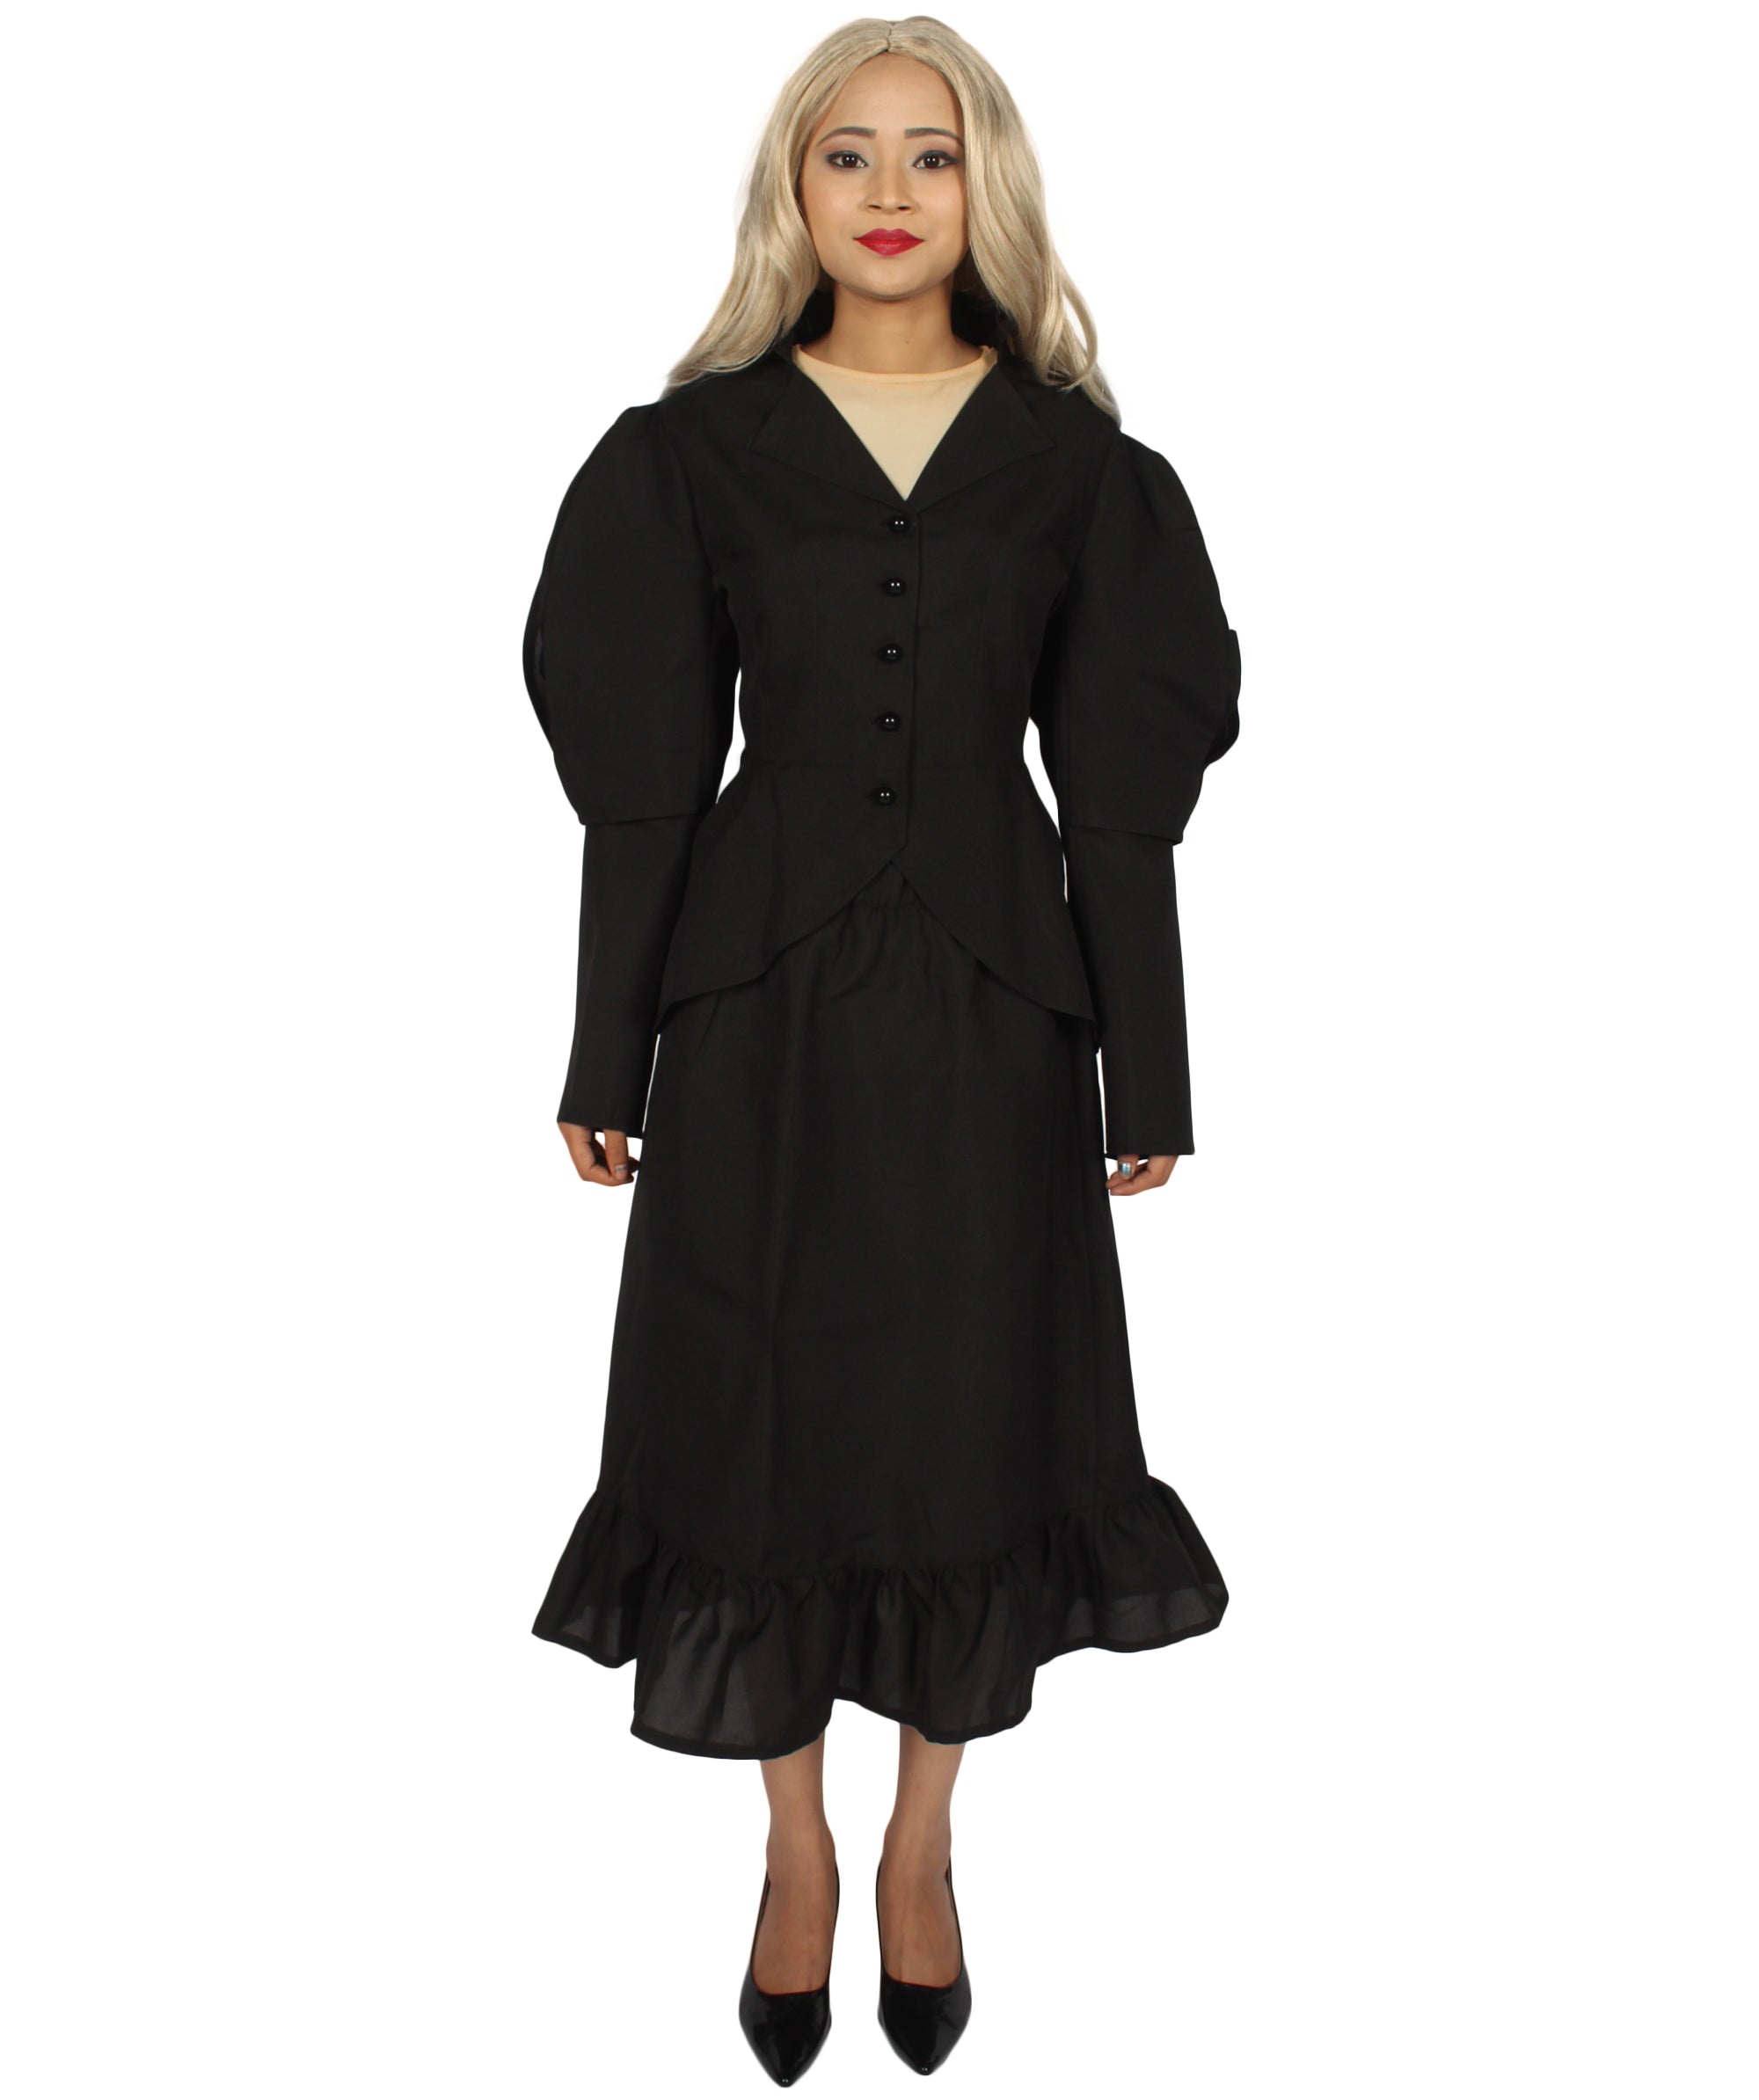 Adult Women's Home for Peculiar Children Miss Peregrine Costume ...